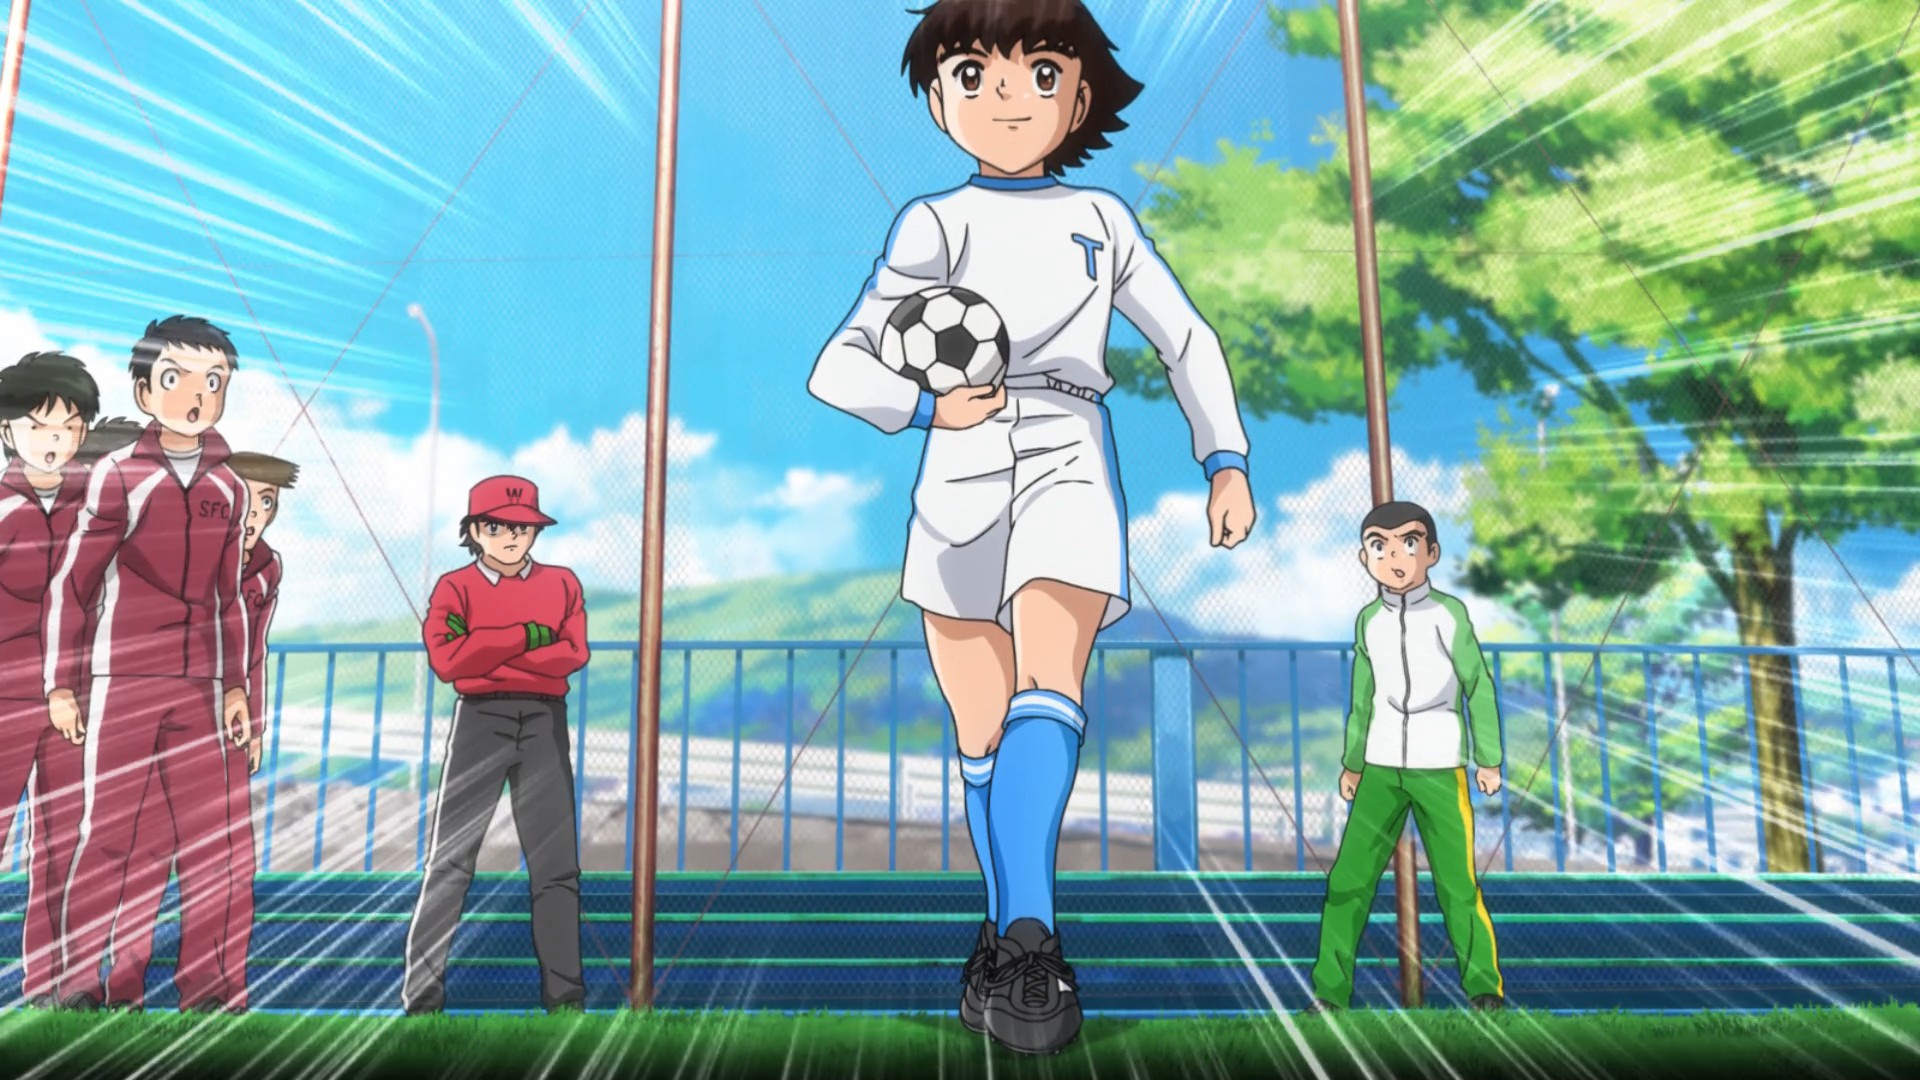 Anime of The Week] Captain Tsubasa, the Most Popular Football Anime in  Indonesia! | Dunia Games